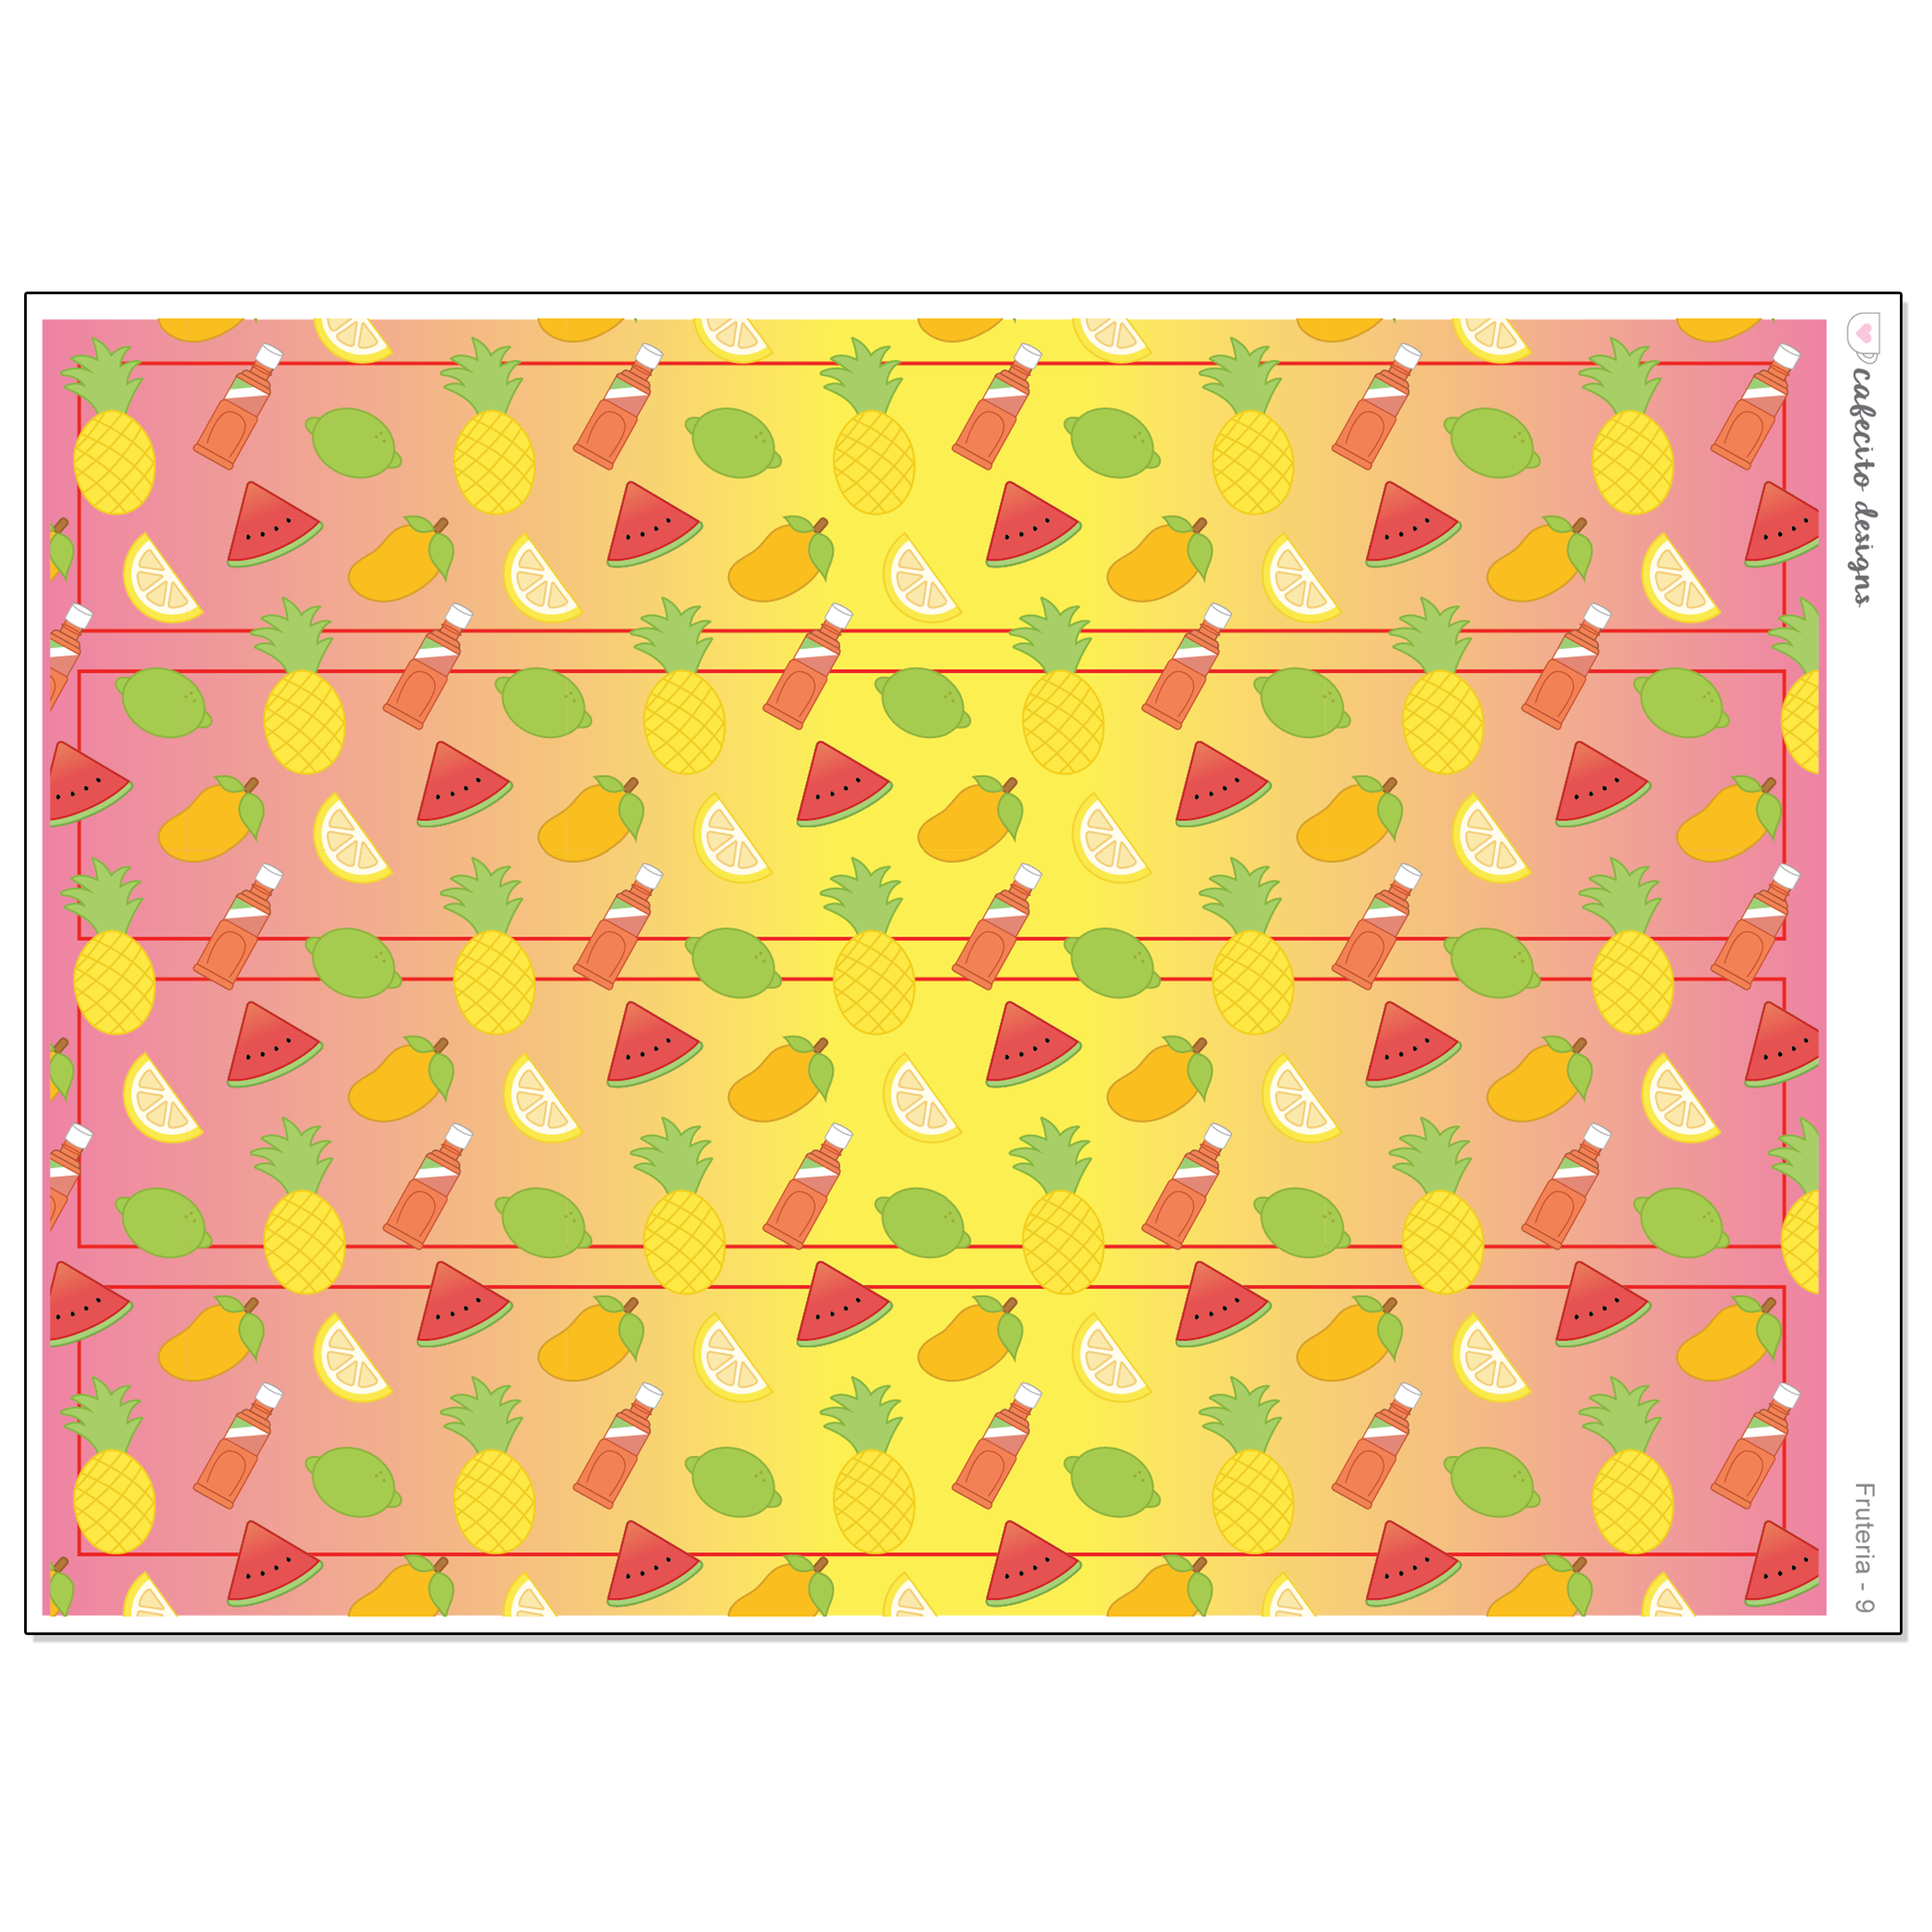 Fruteria - Functional Stickers